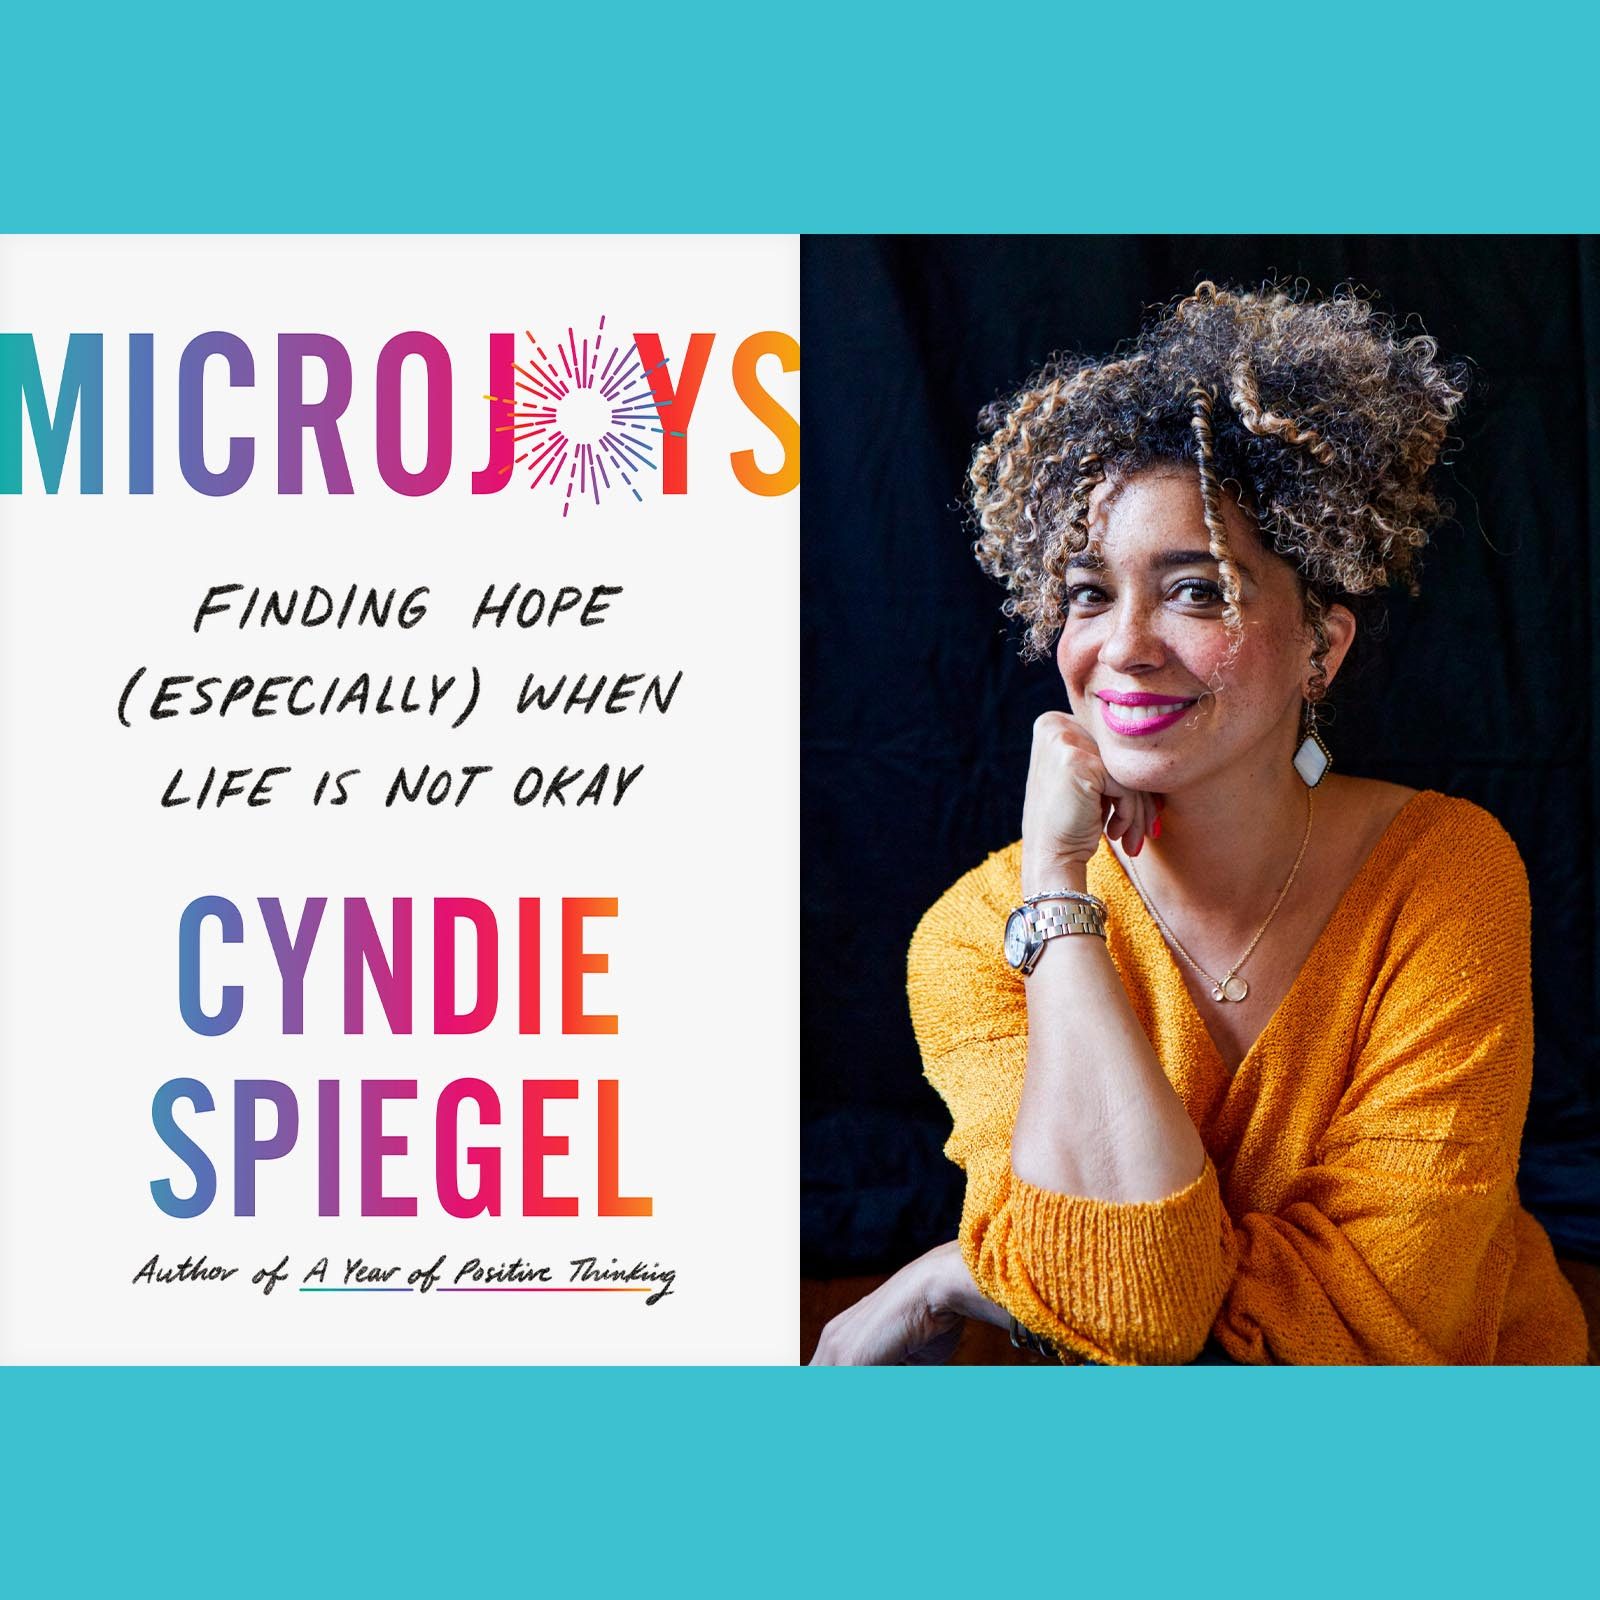 Microjoys: Finding Hope (Especially) When Life Is Not Okay by Cyndie Spiegel